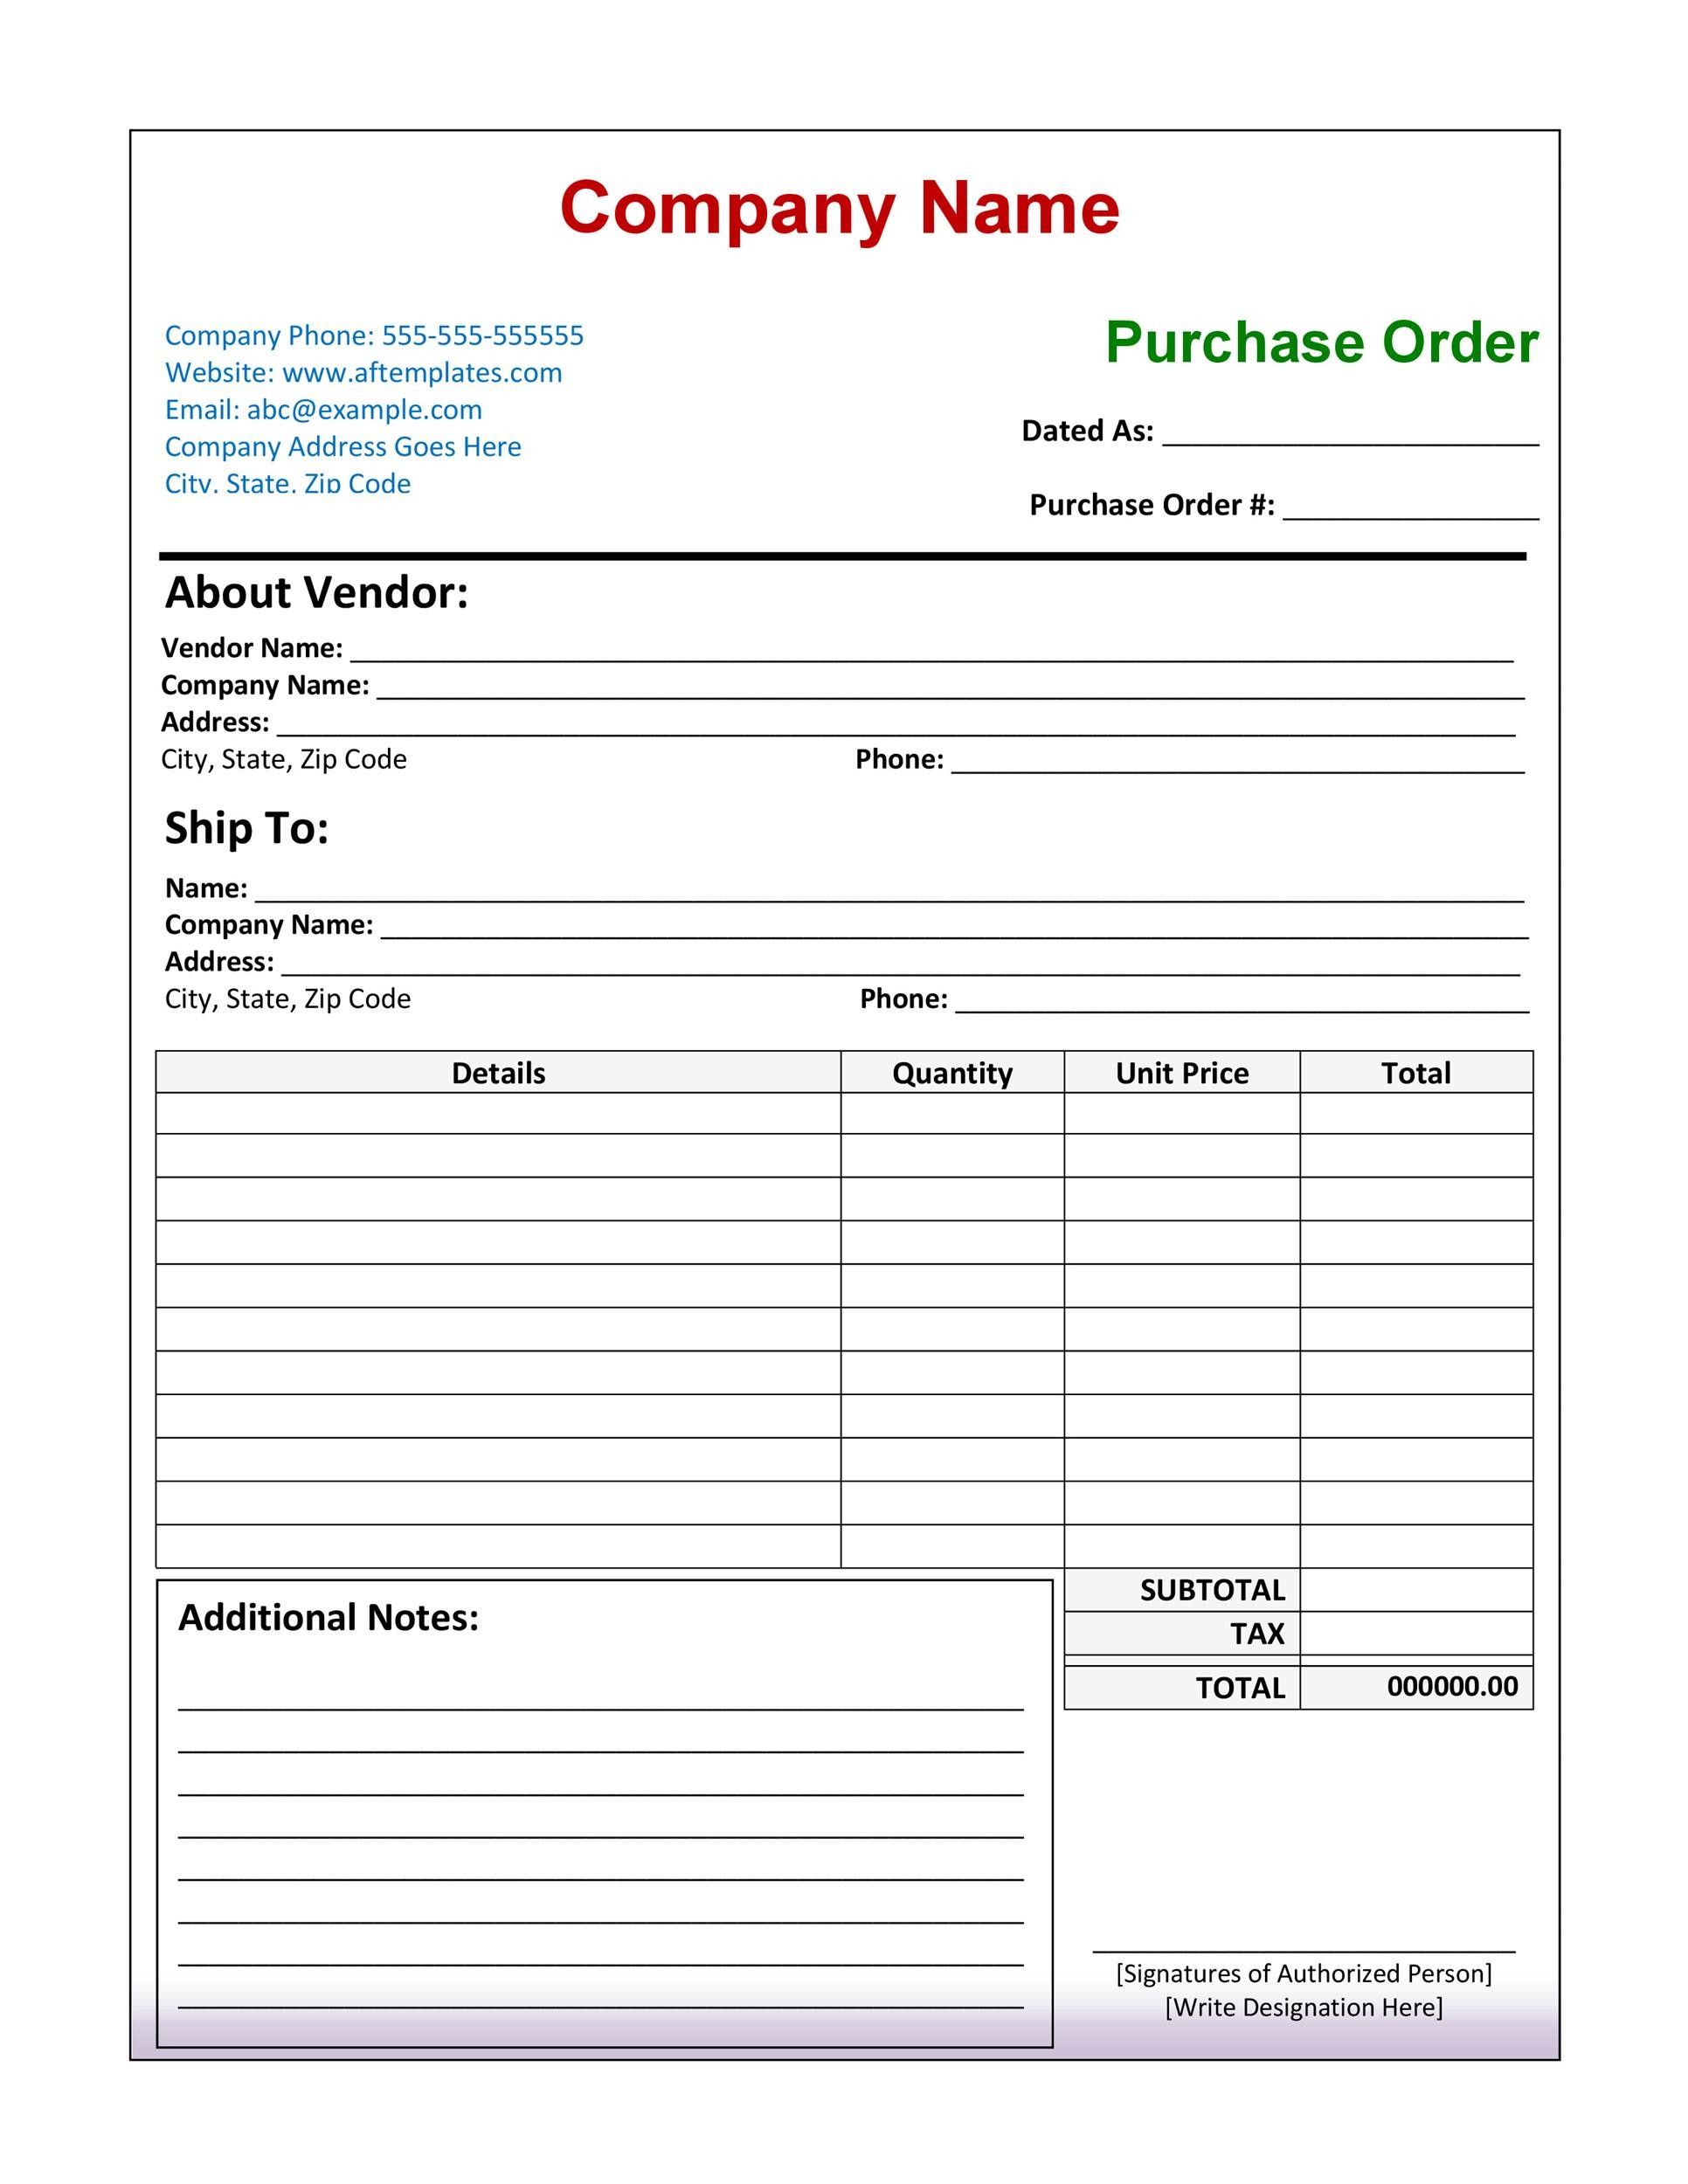 43-free-purchase-order-templates-in-word-excel-pdf